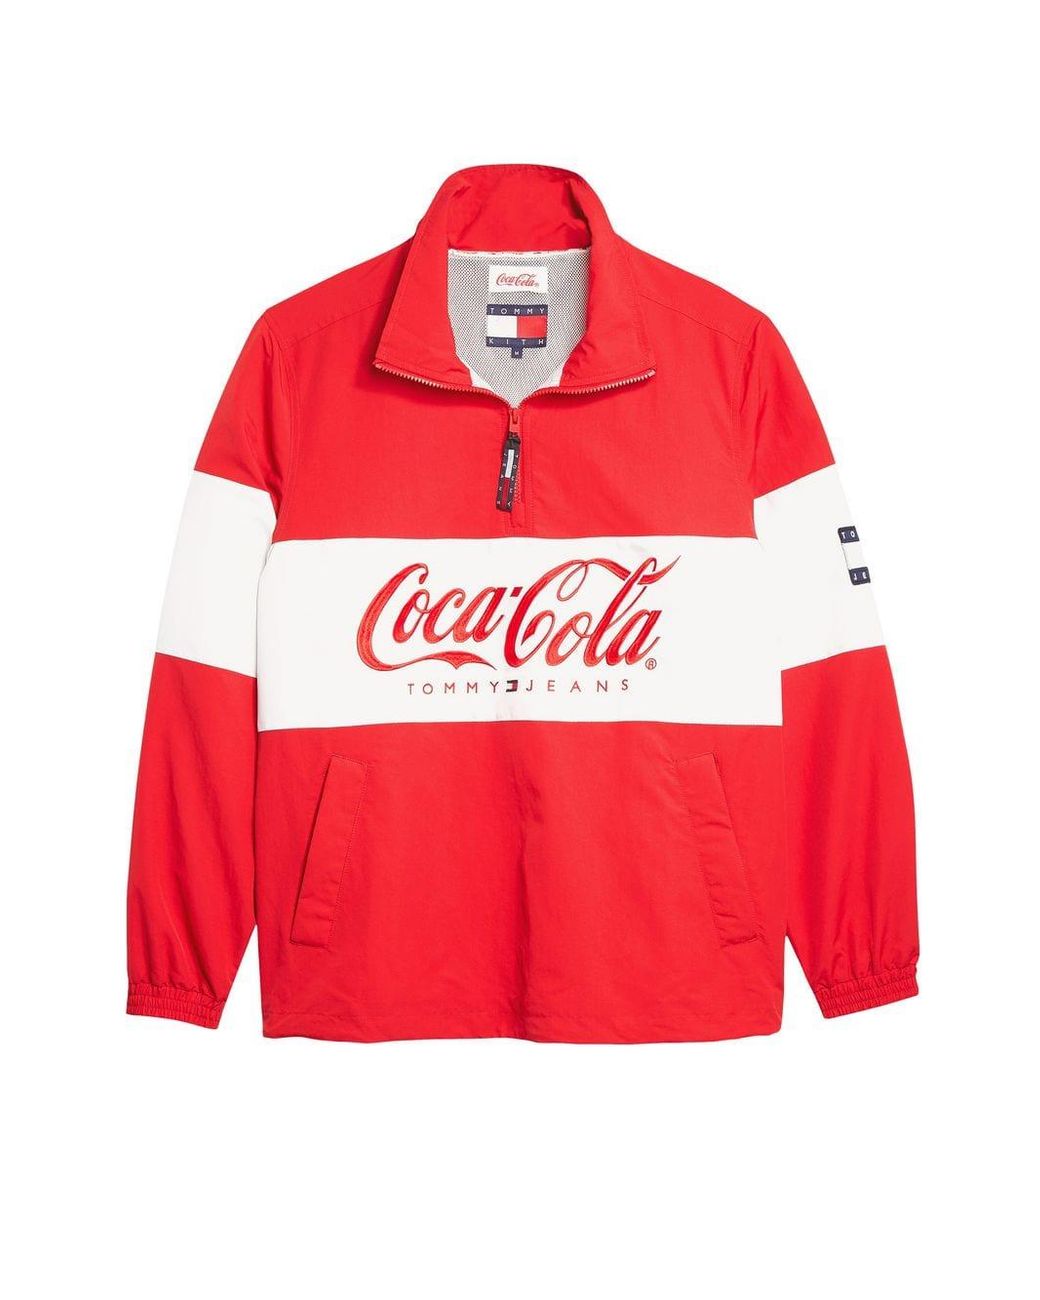 Coca Cola Tommy Hilfiger Jacket Cheapest Offers, 58% OFF | bene.pizza